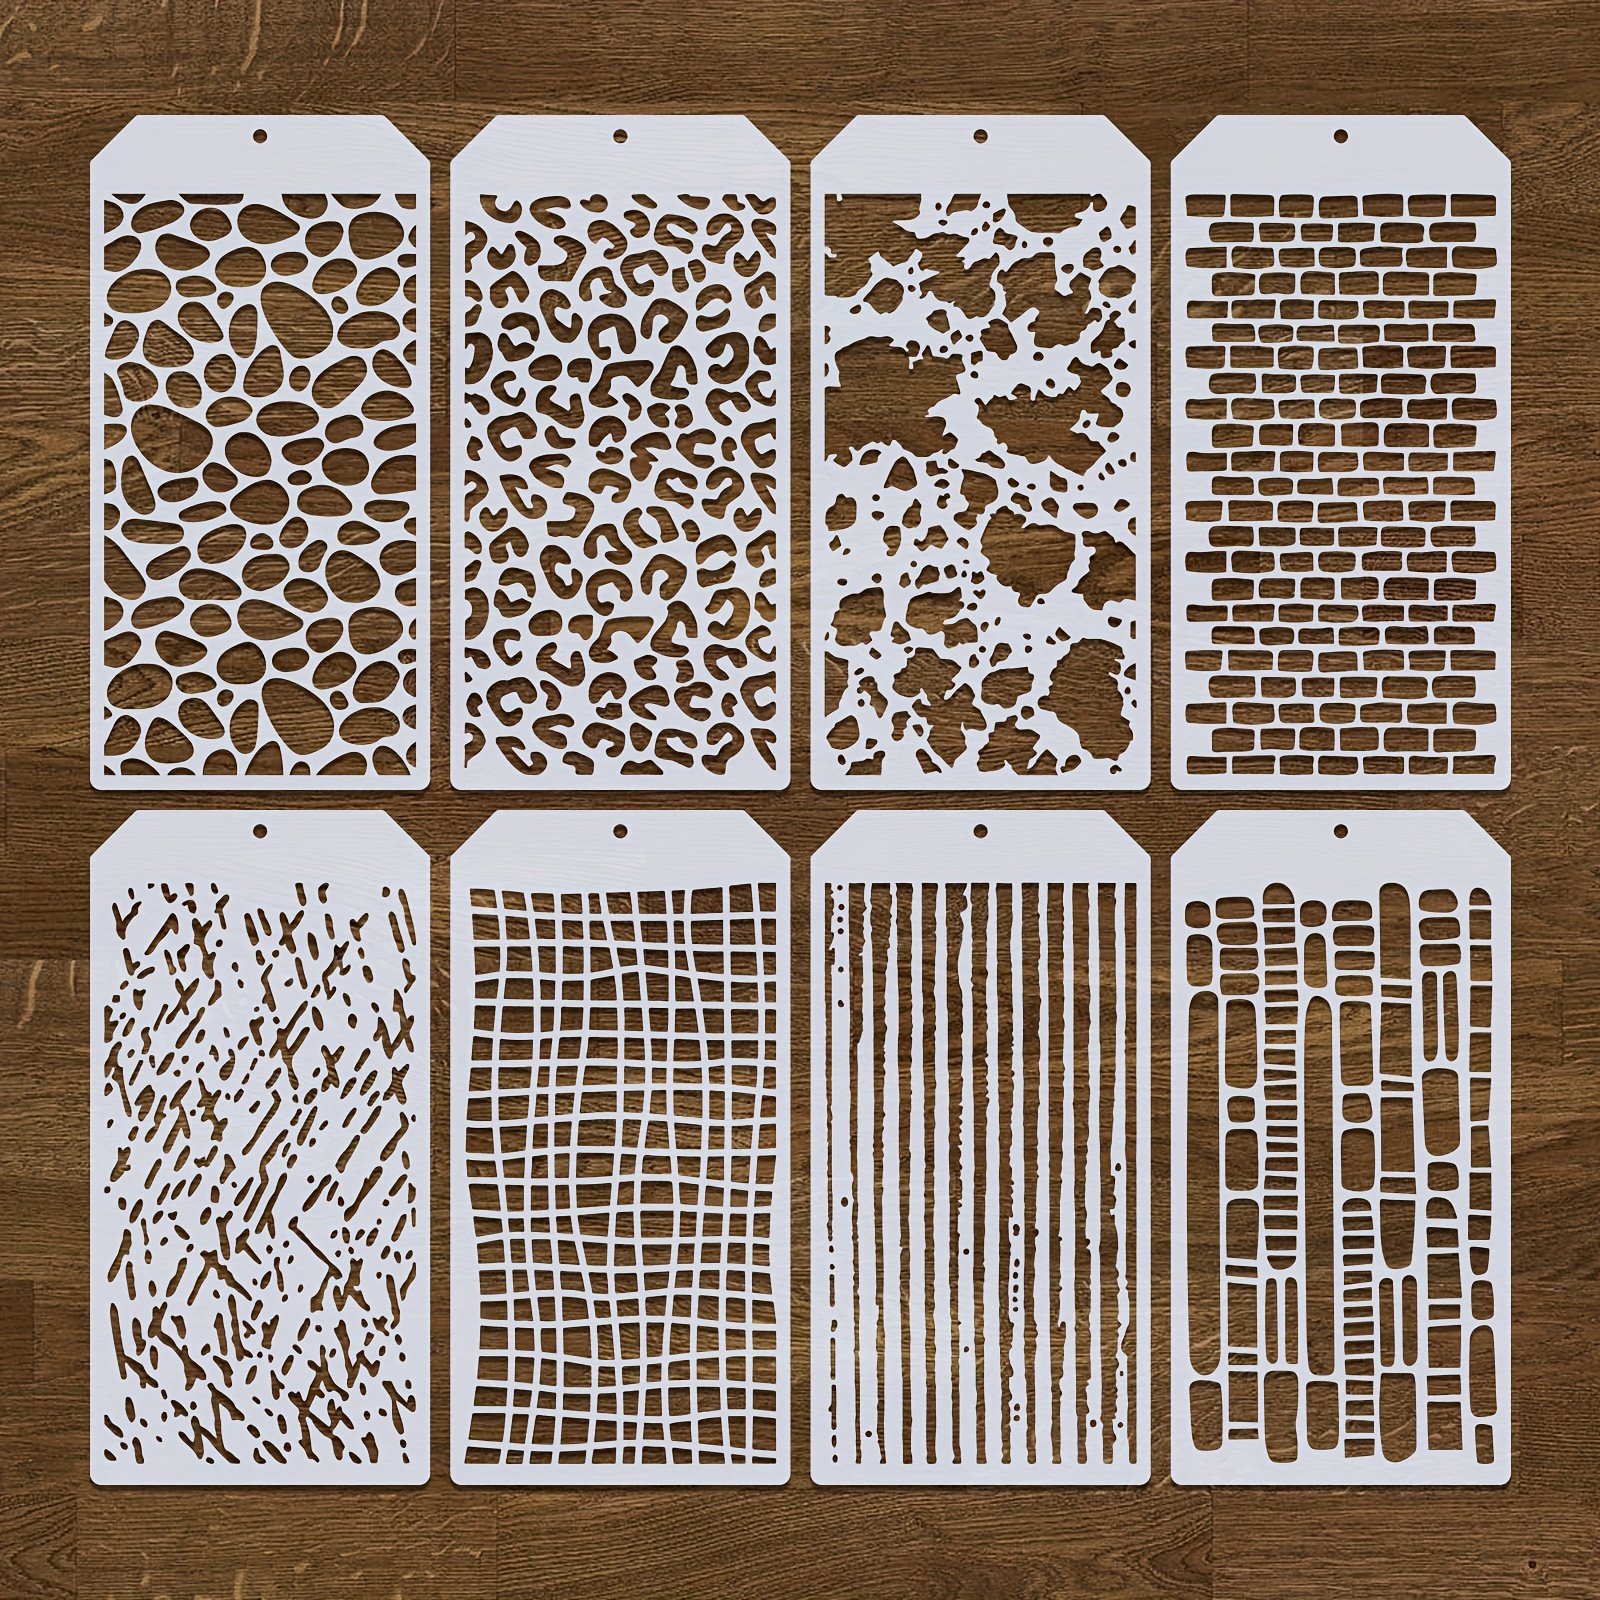 

durable Plastic" 8-pack Reusable Craft Stencils 4.7x9.4" - Leopard & Brick Patterns For Wood, Furniture & Paper Art Projects